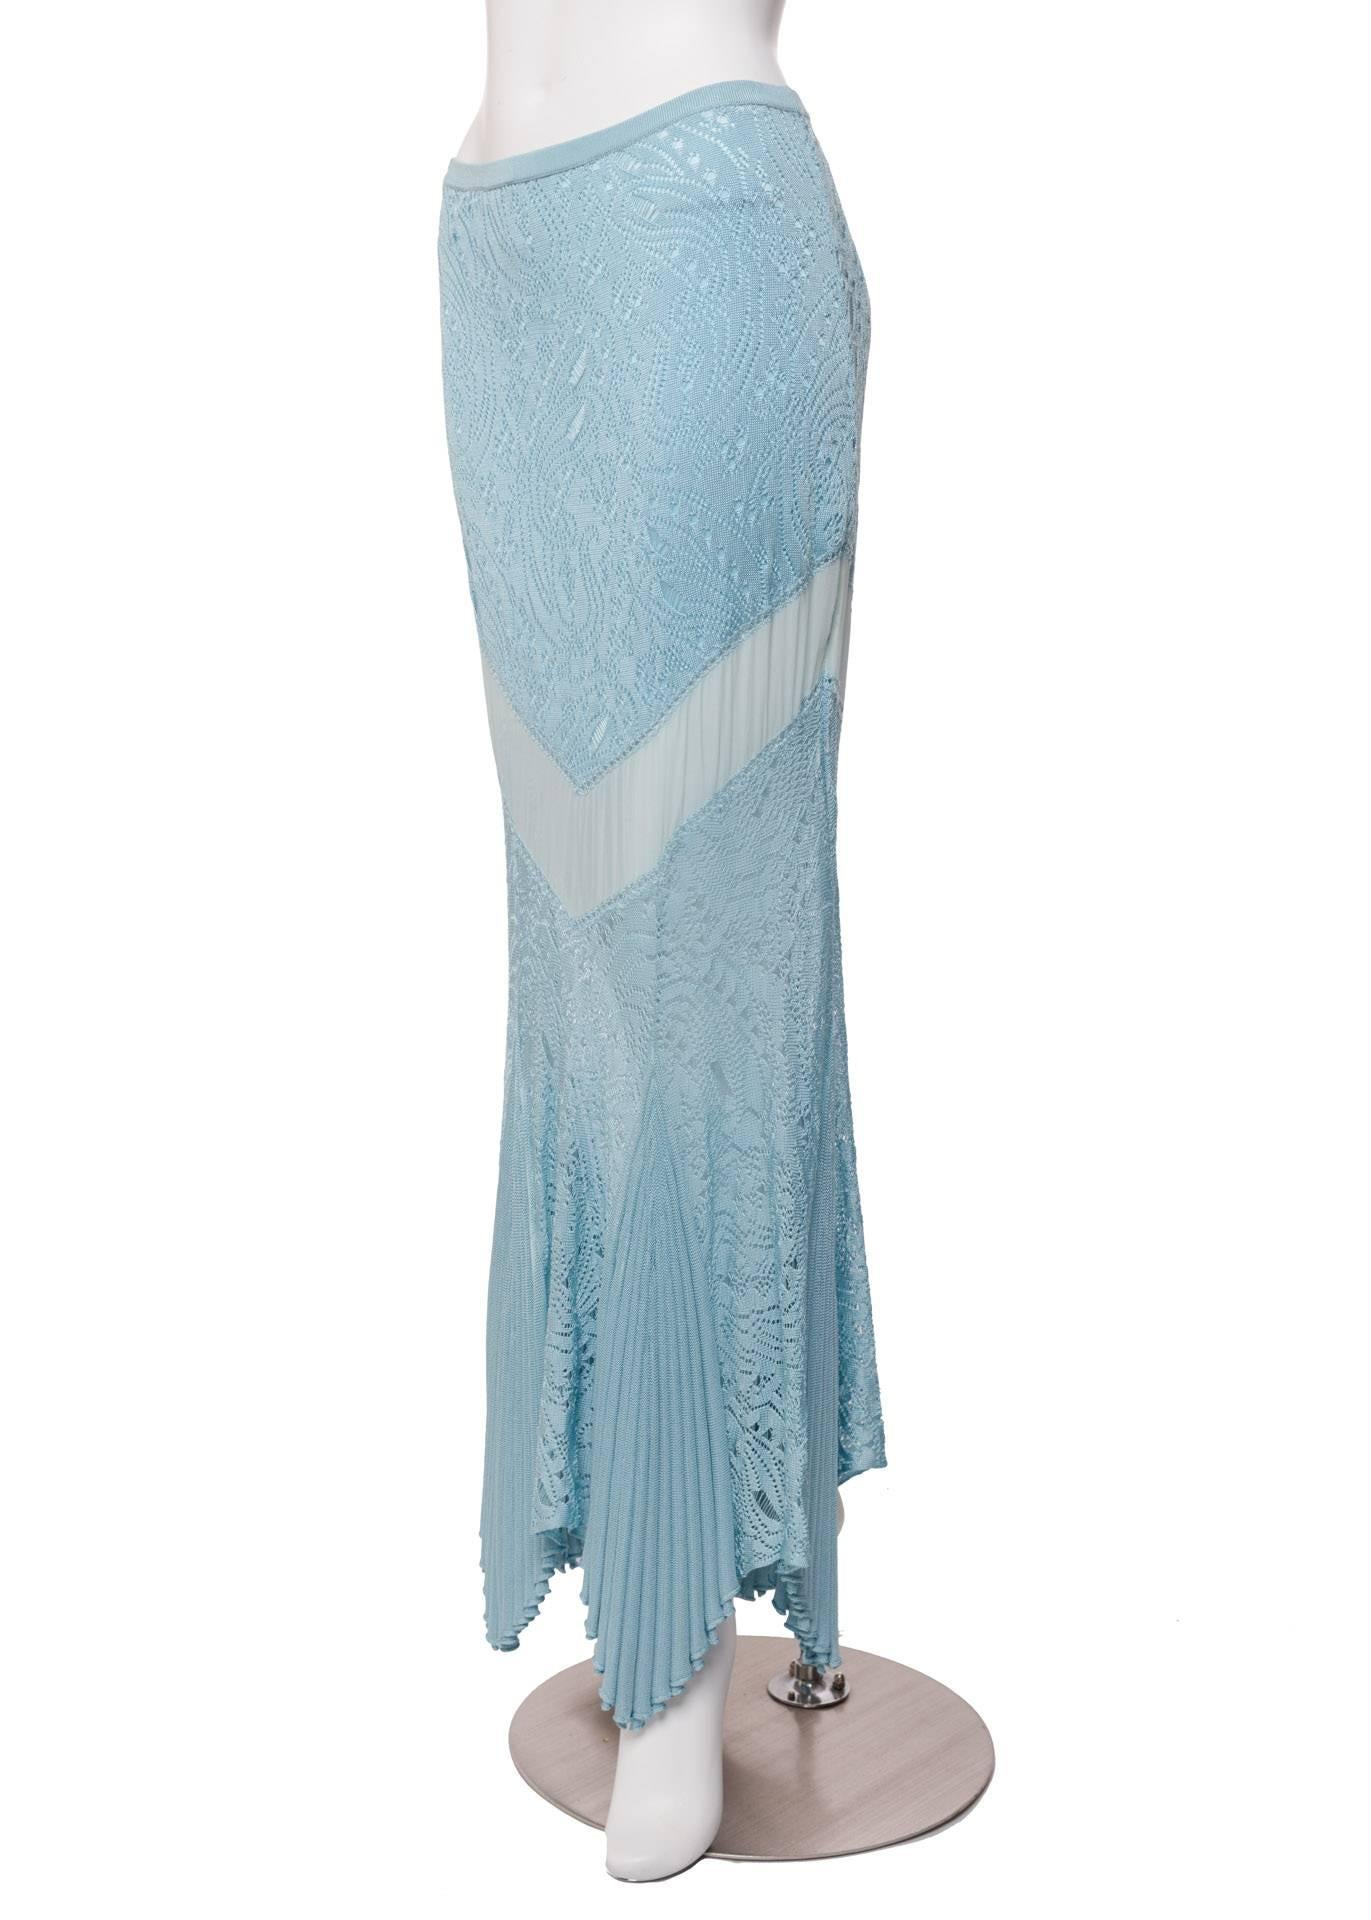 This powder blue skirt is an exquisite reminder of how John Galliano reveled in the theatricality of dressing while he was at Christian Dior. Featuring a stunning mermaid hem that is inset with pleats that fan out along the bottom, it could have